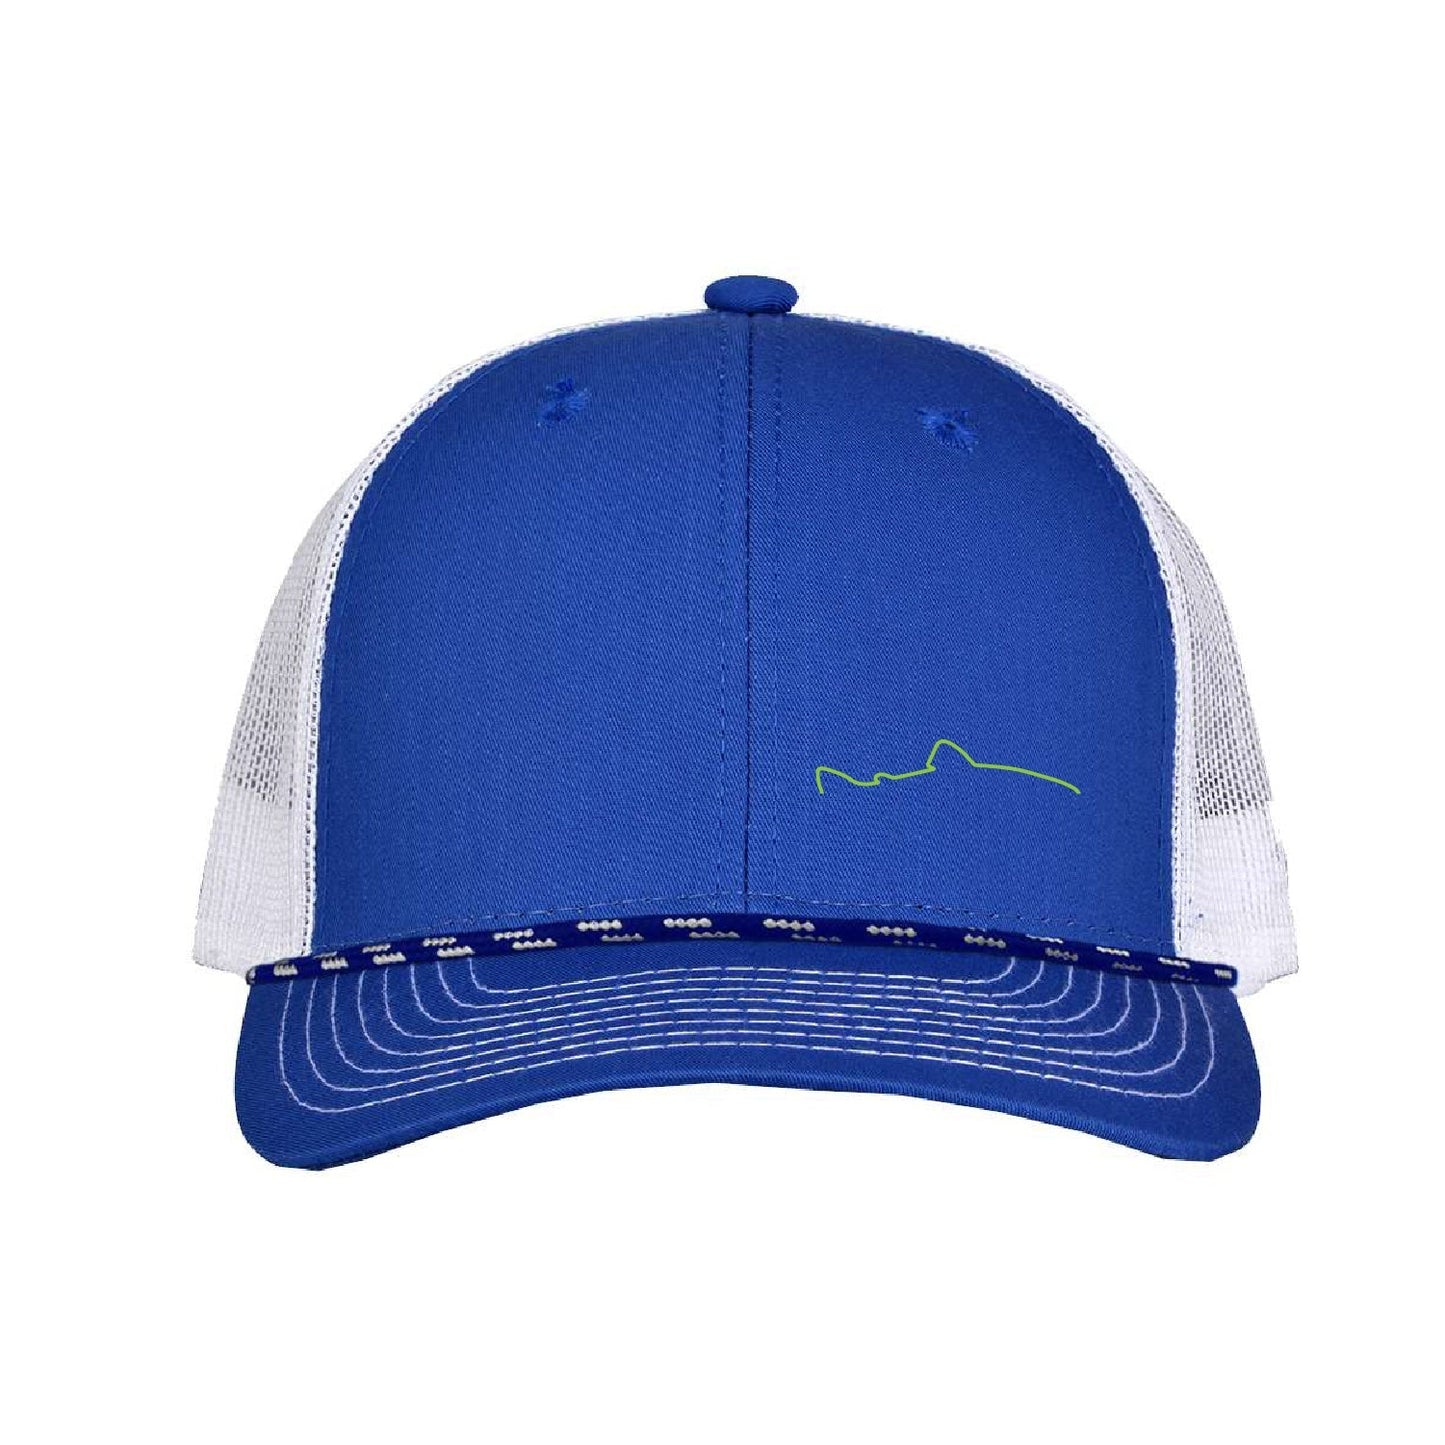 Catch Your Moment Rope Trucker Cap - DSP On Demand